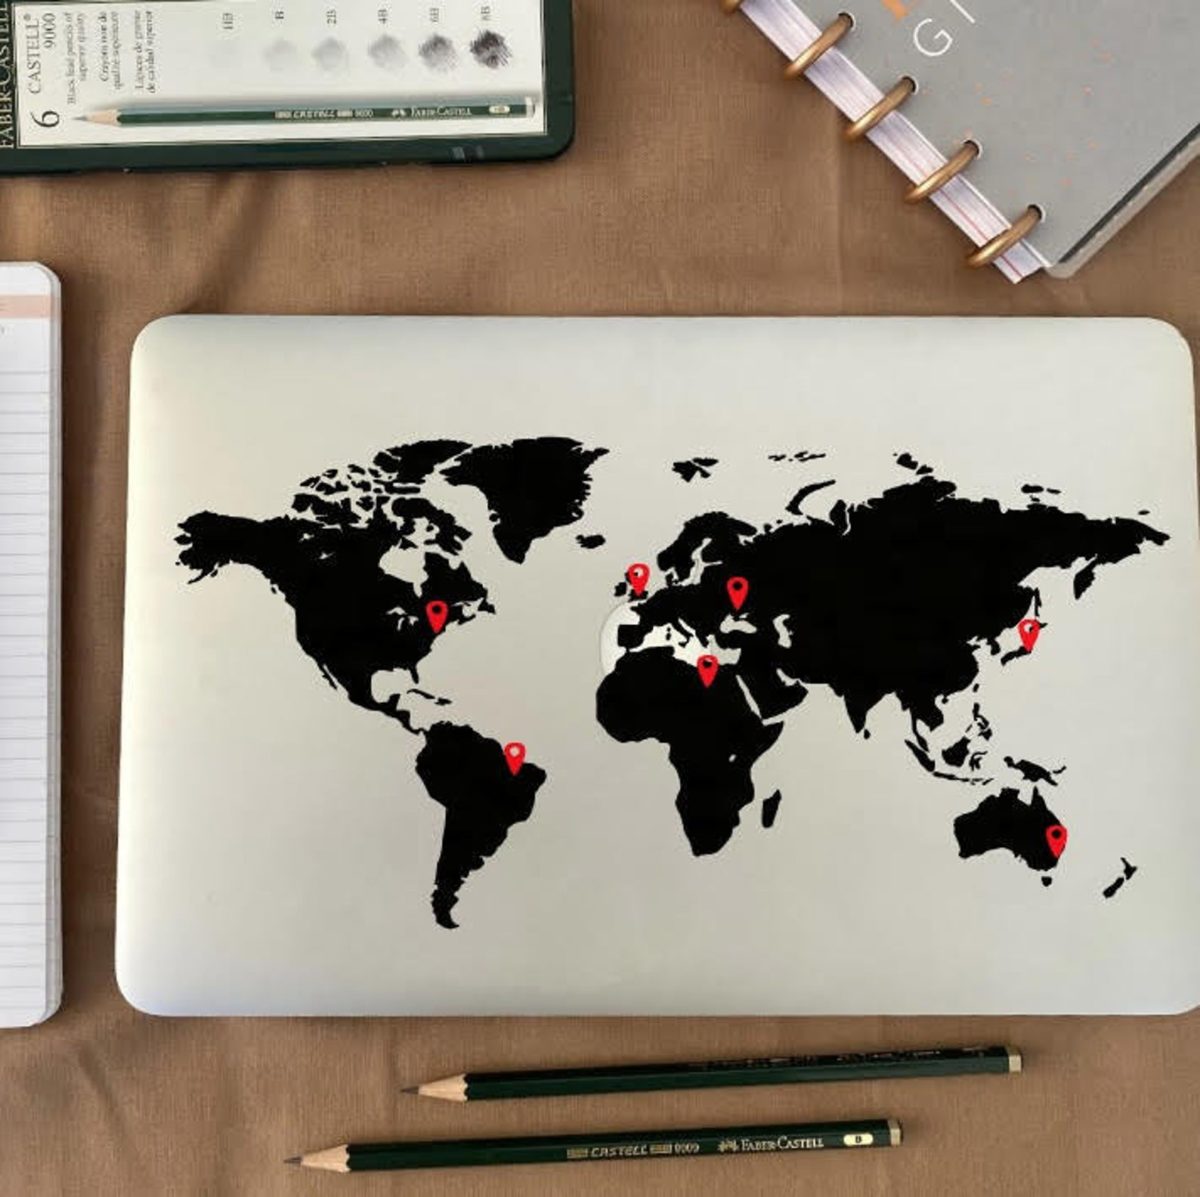 23 awesome laptop decals from etsy to make working a bit more fun | get creative with your workspace, specifically your laptop!